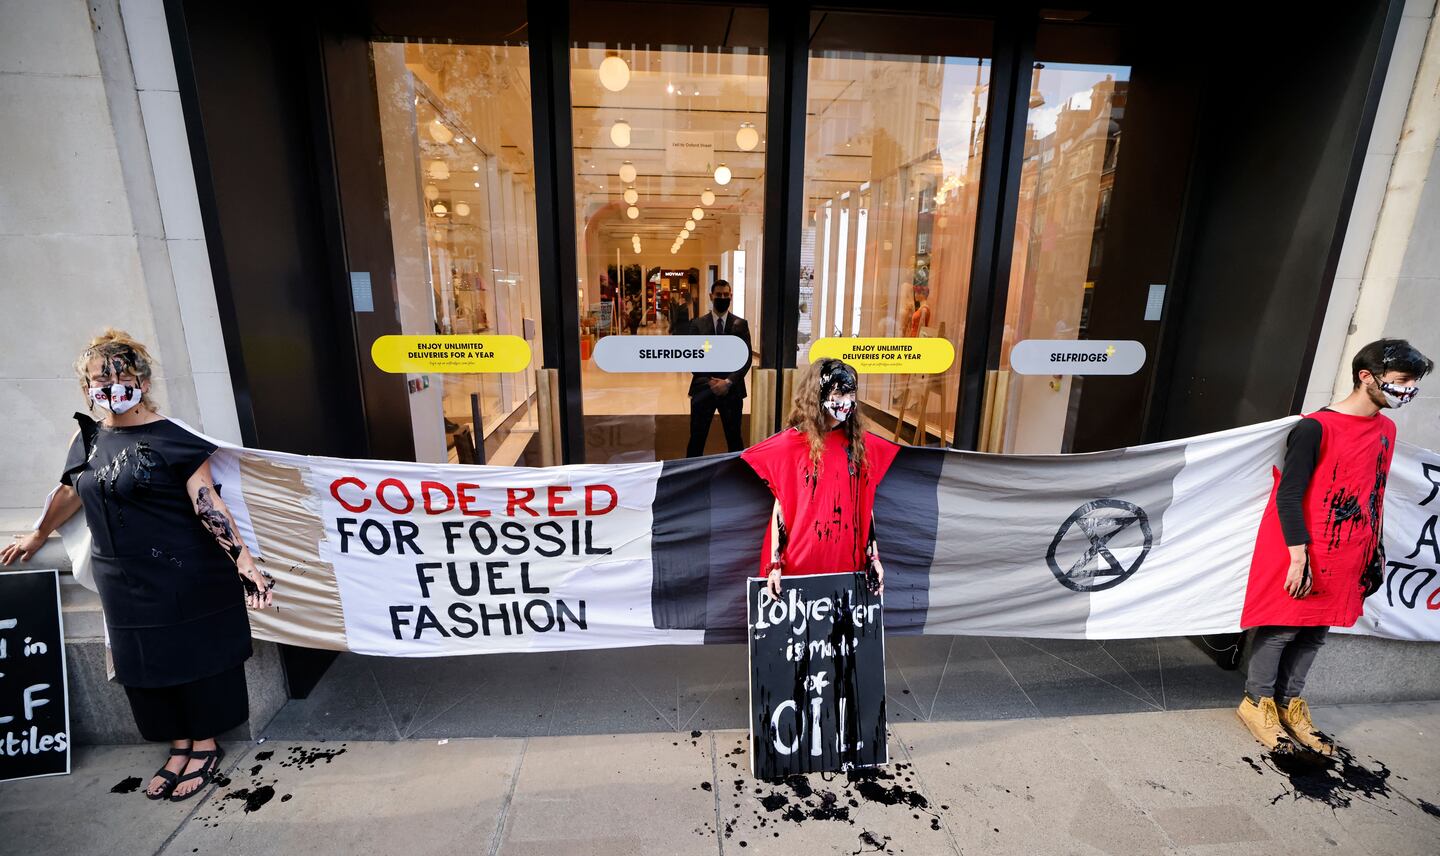 Activists from the Extinction Rebellion demonstrate outside Selfridges store in central London on August 24, 2021 during the group's 'Impossible Rebellion' series of actions.